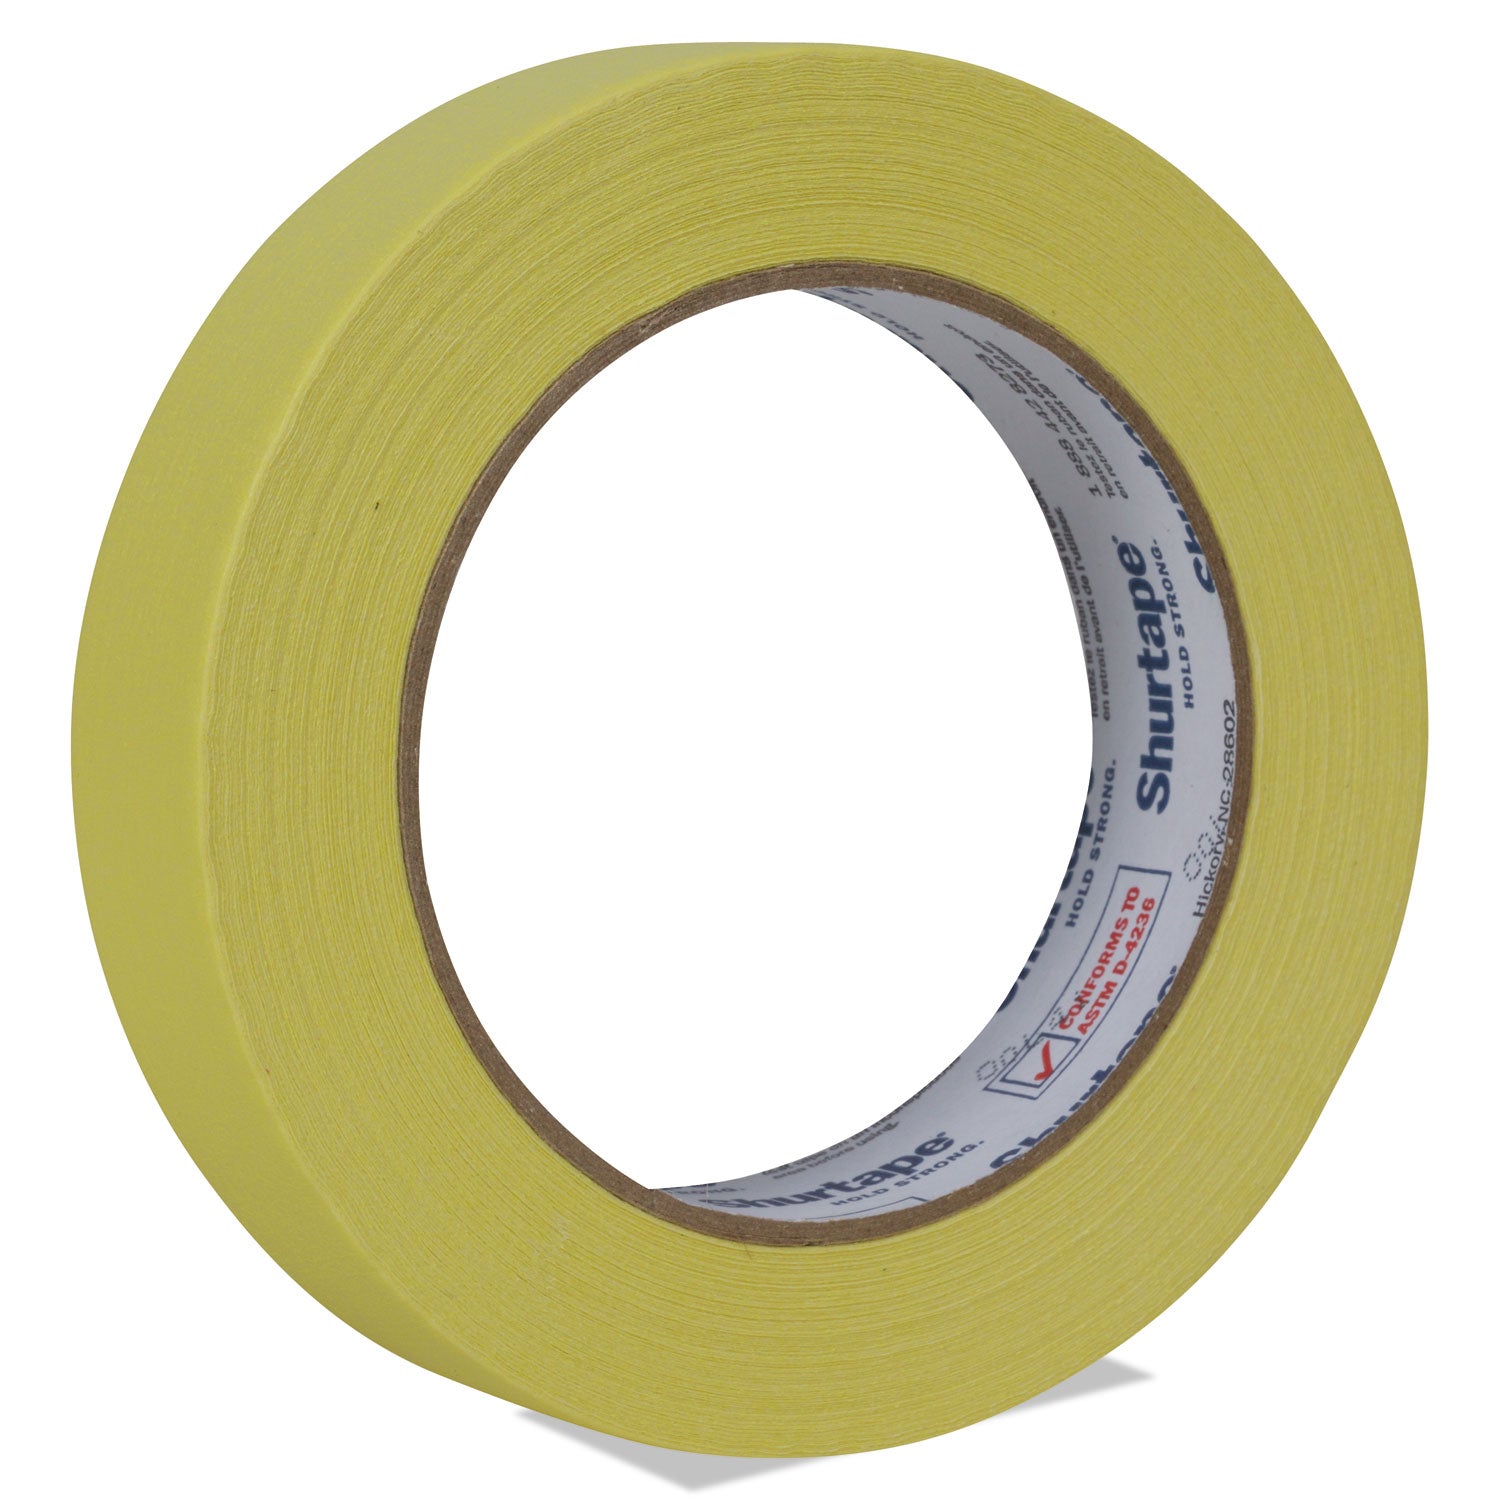 Color Masking Tape, 3" Core, 0.94" x 60 yds, Yellow - 